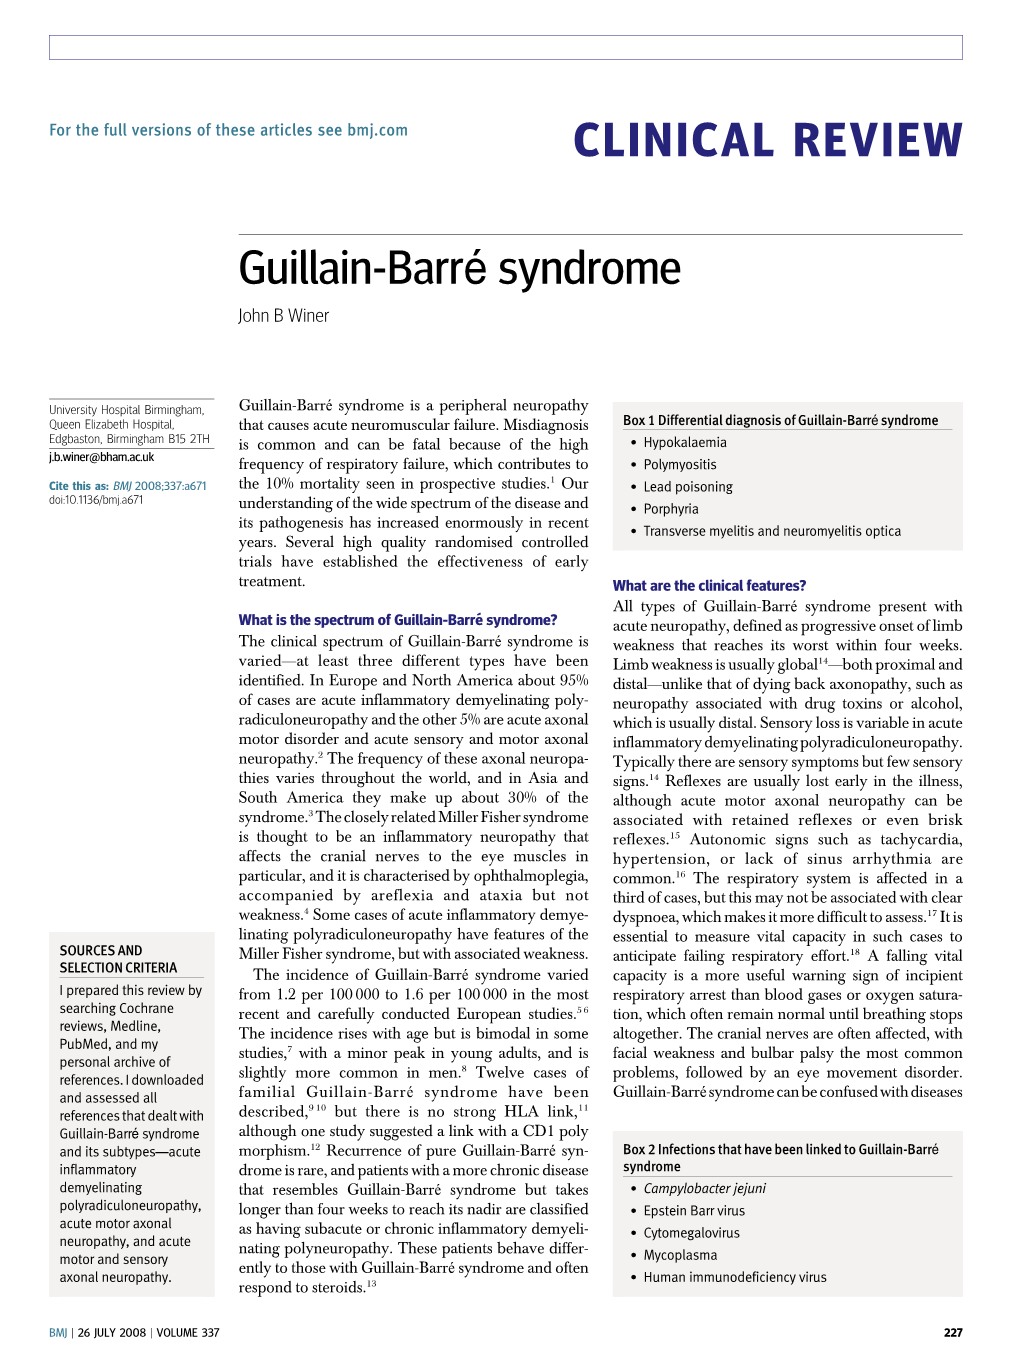 CLINICAL REVIEW Guillain-Barré Syndrome